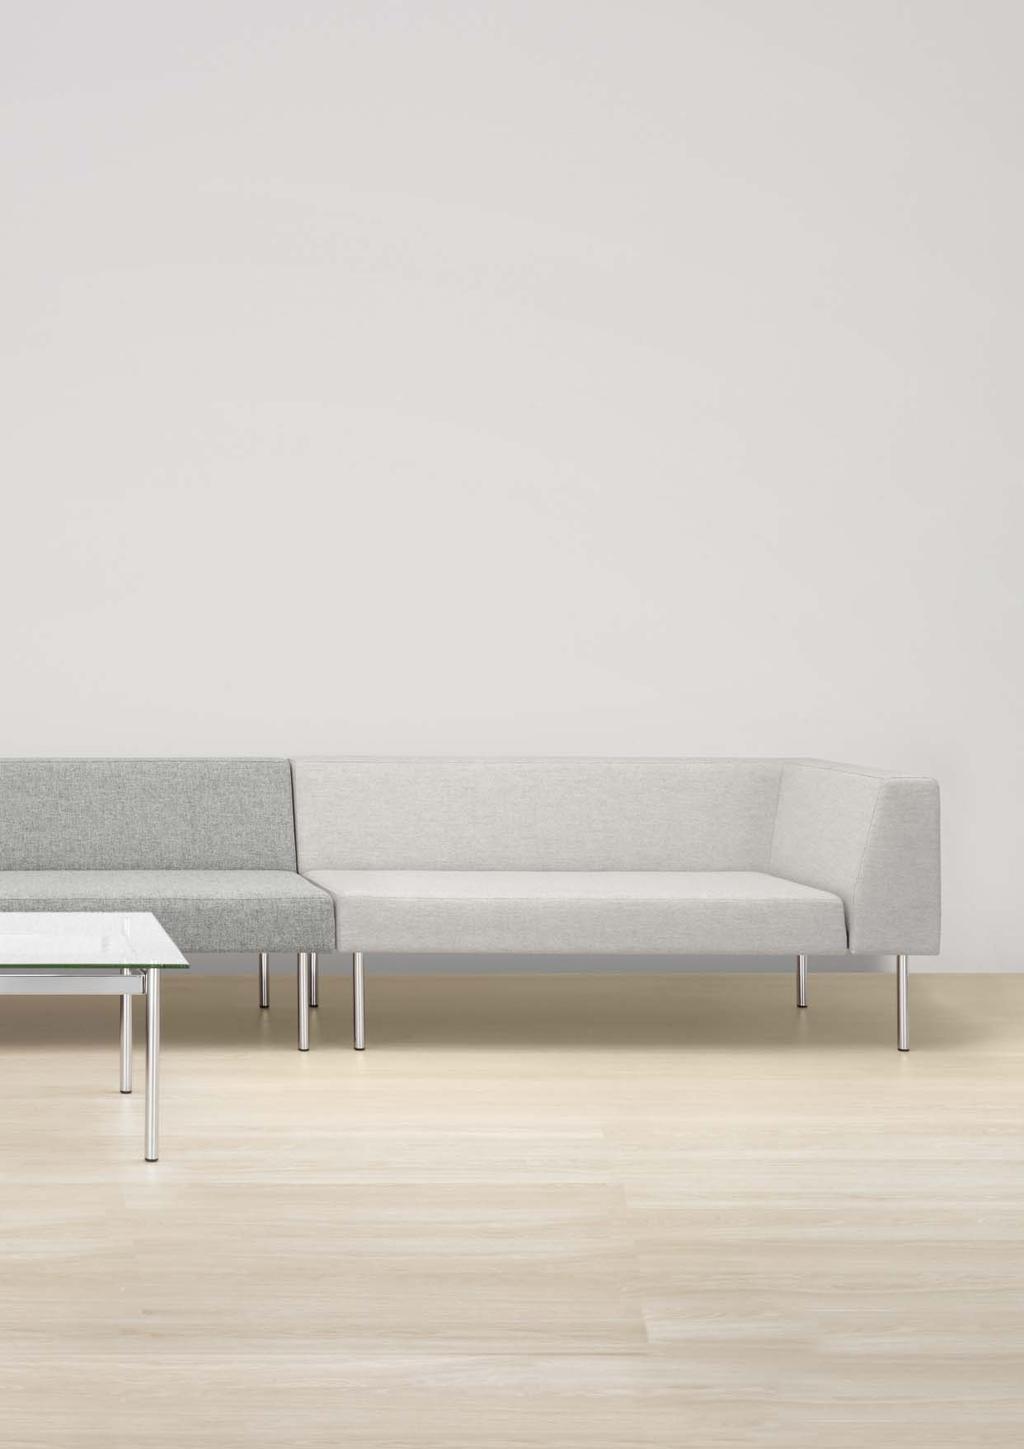 GRAND CANYON DESIGN TIMO RIPATTI The stylish and architectural GRAND CANYON sofa system contains a total of 16 different kinds of sofas and bench modules, as well as a table.